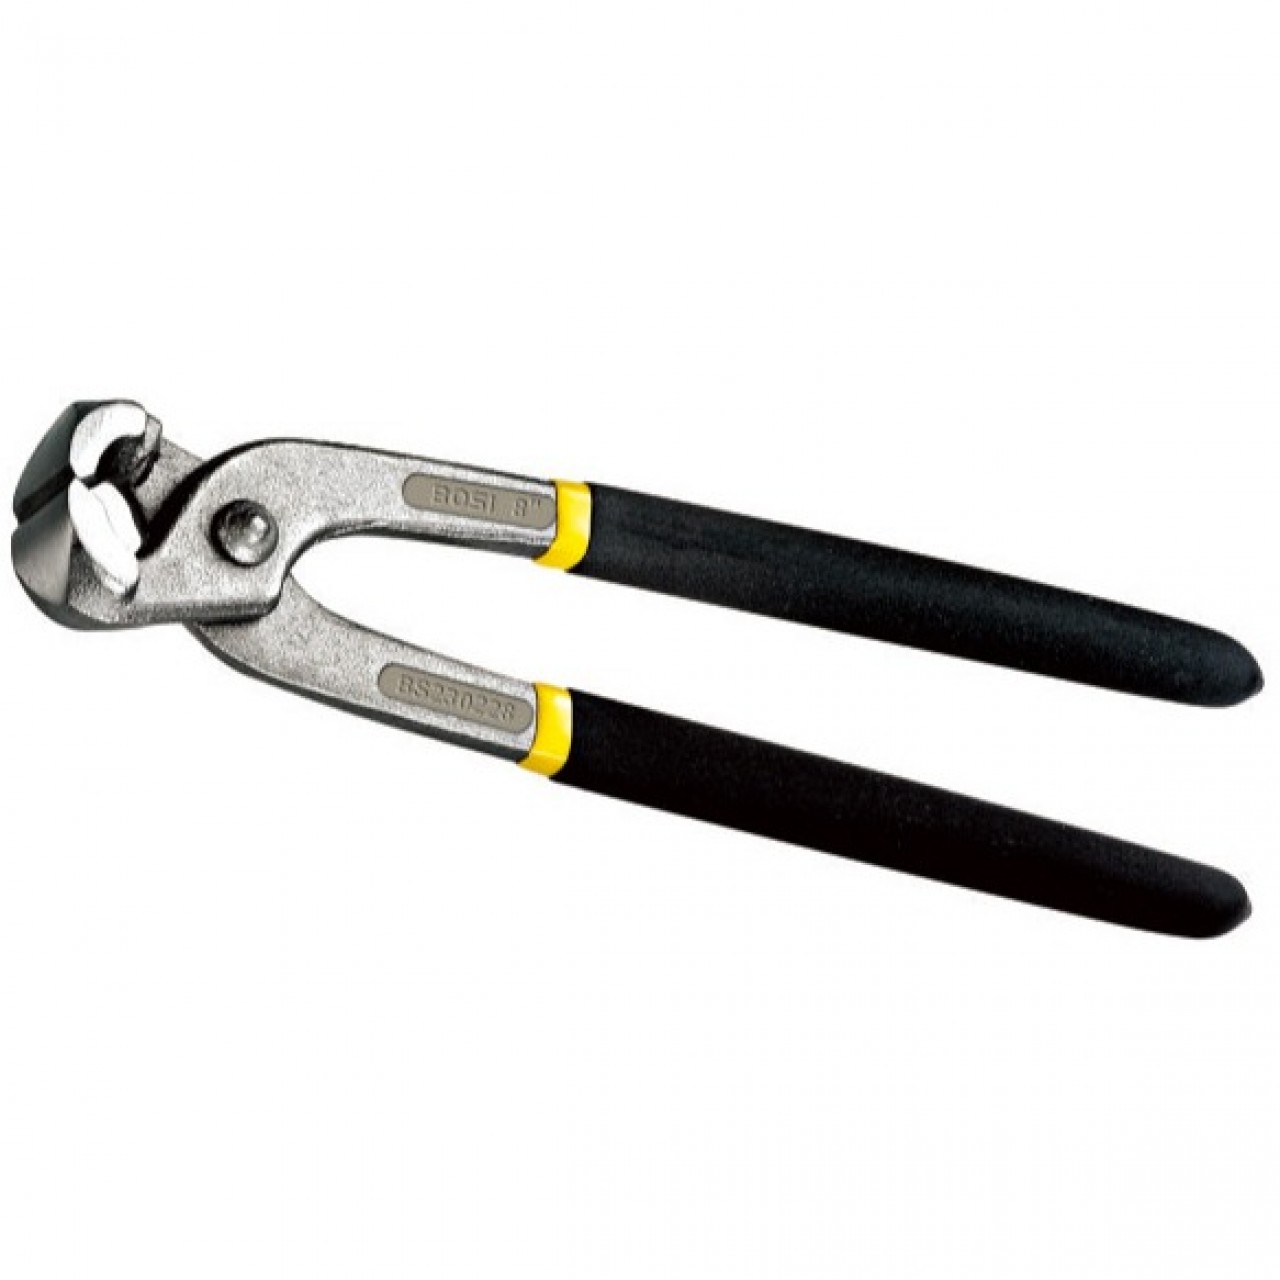 BOSI Tower Pincer Pliers - Nail Puller BS-D228 - 8"/200MM